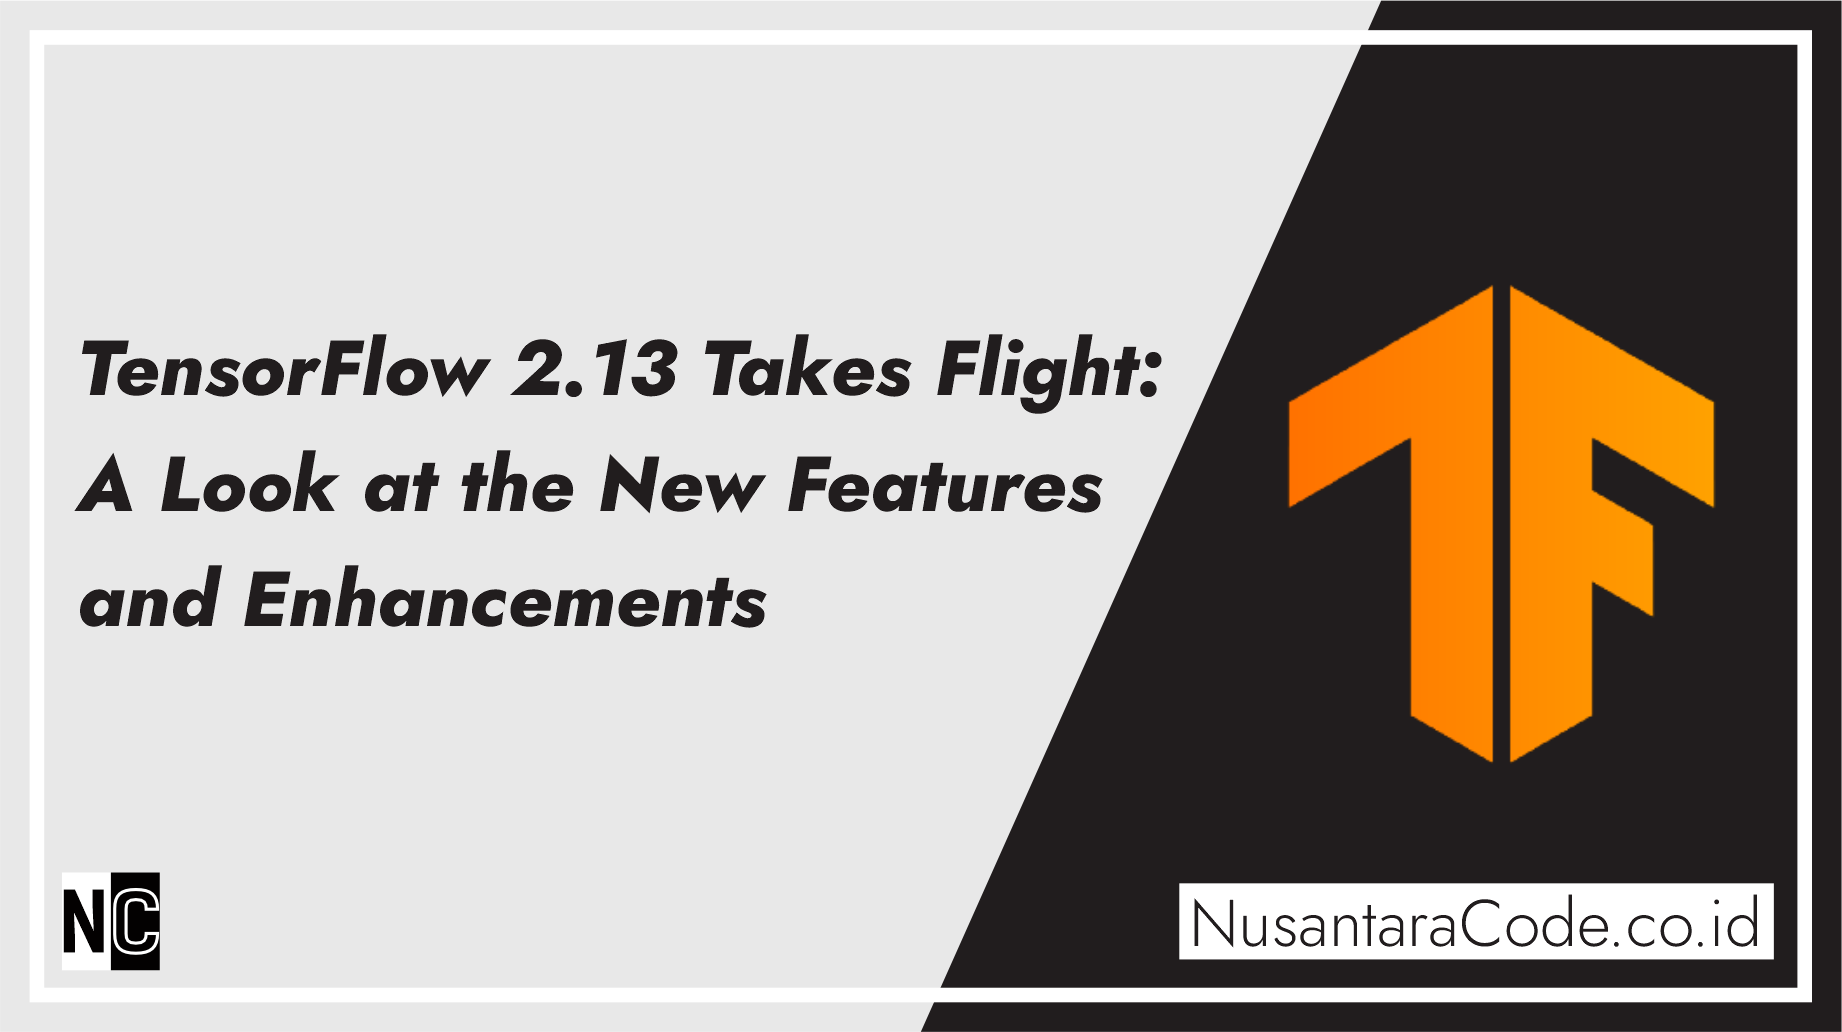 TensorFlow 2.13 Takes Flight: A Look at the New Features and Enhancements